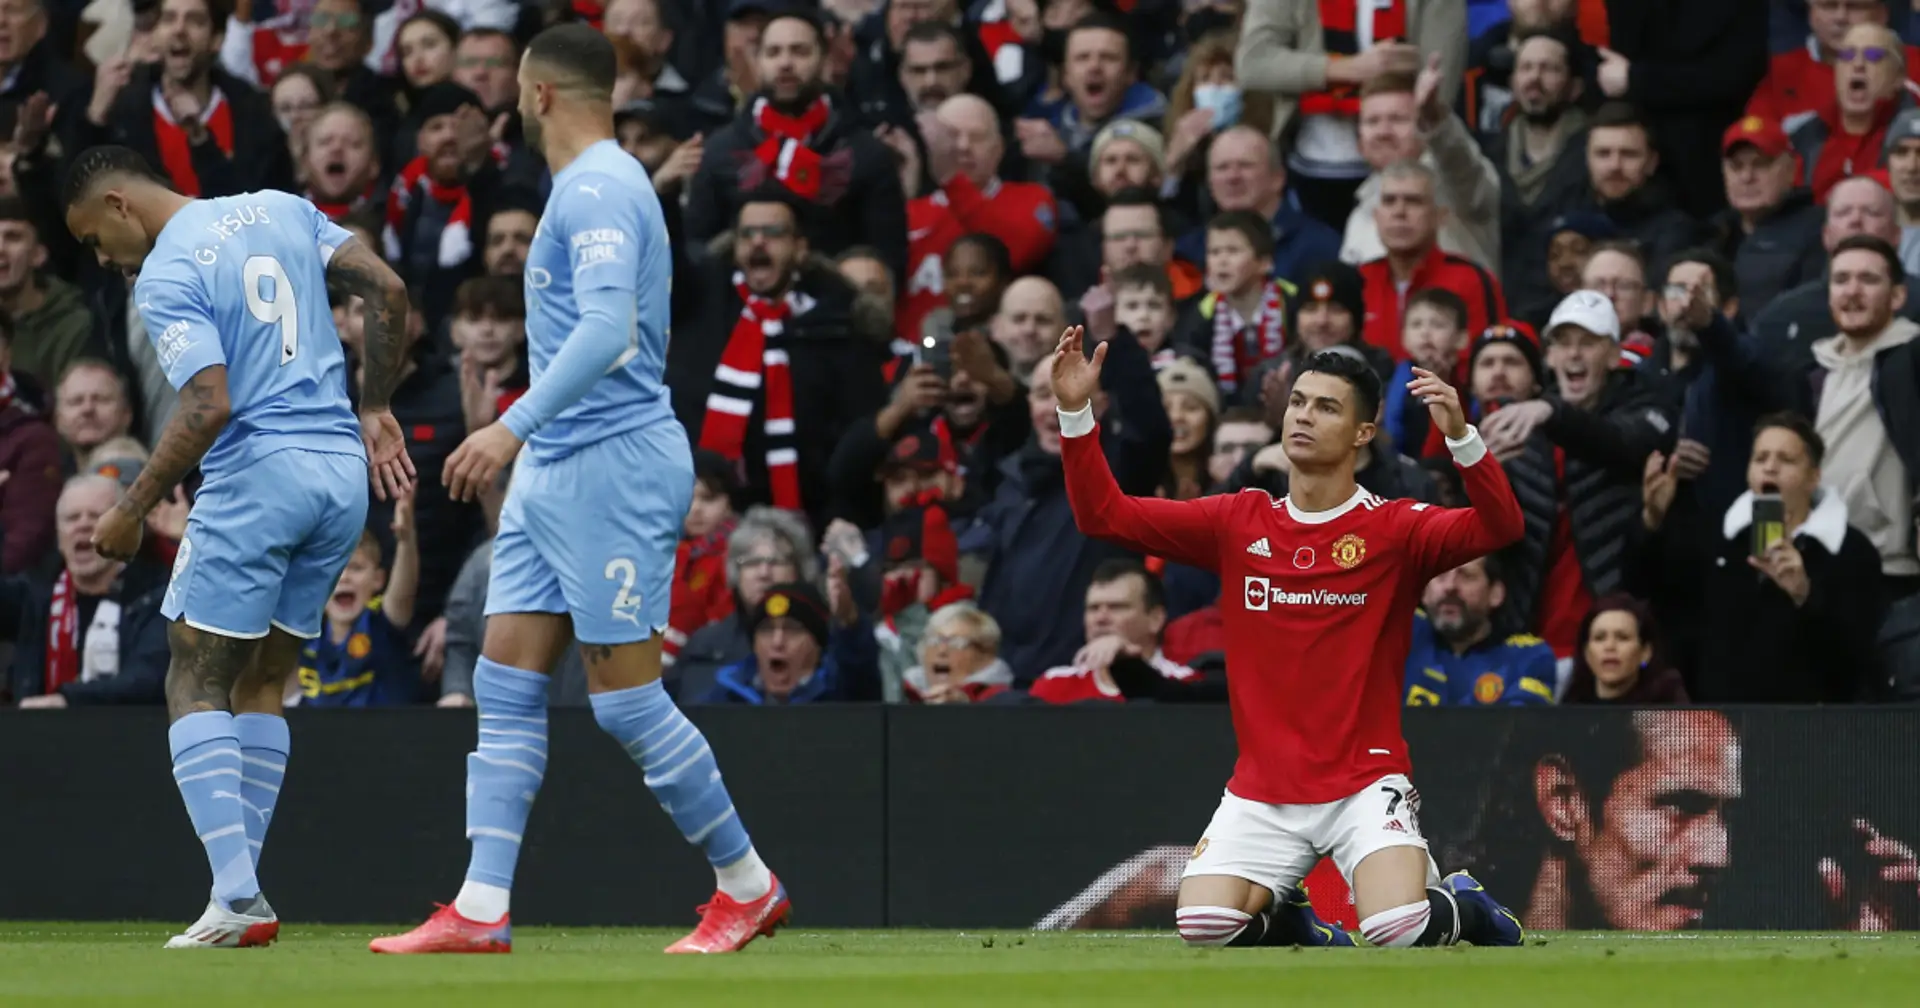 Man United 0-2 Man City, FT. LIVE updates, reactions, stats, ratings & more